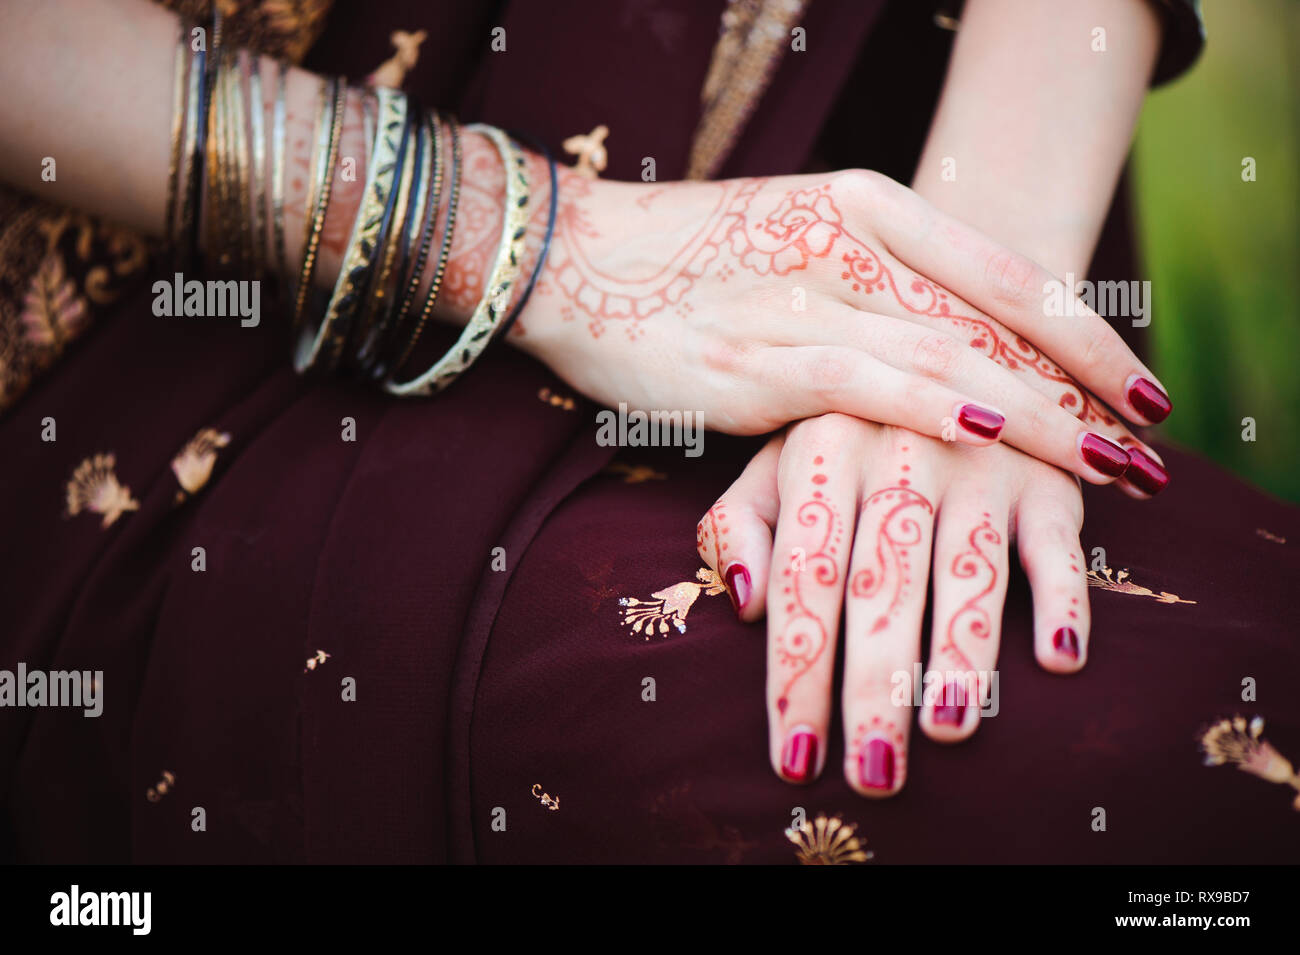 Top 20 Back Hand Mehendi Designs for Any Occasion